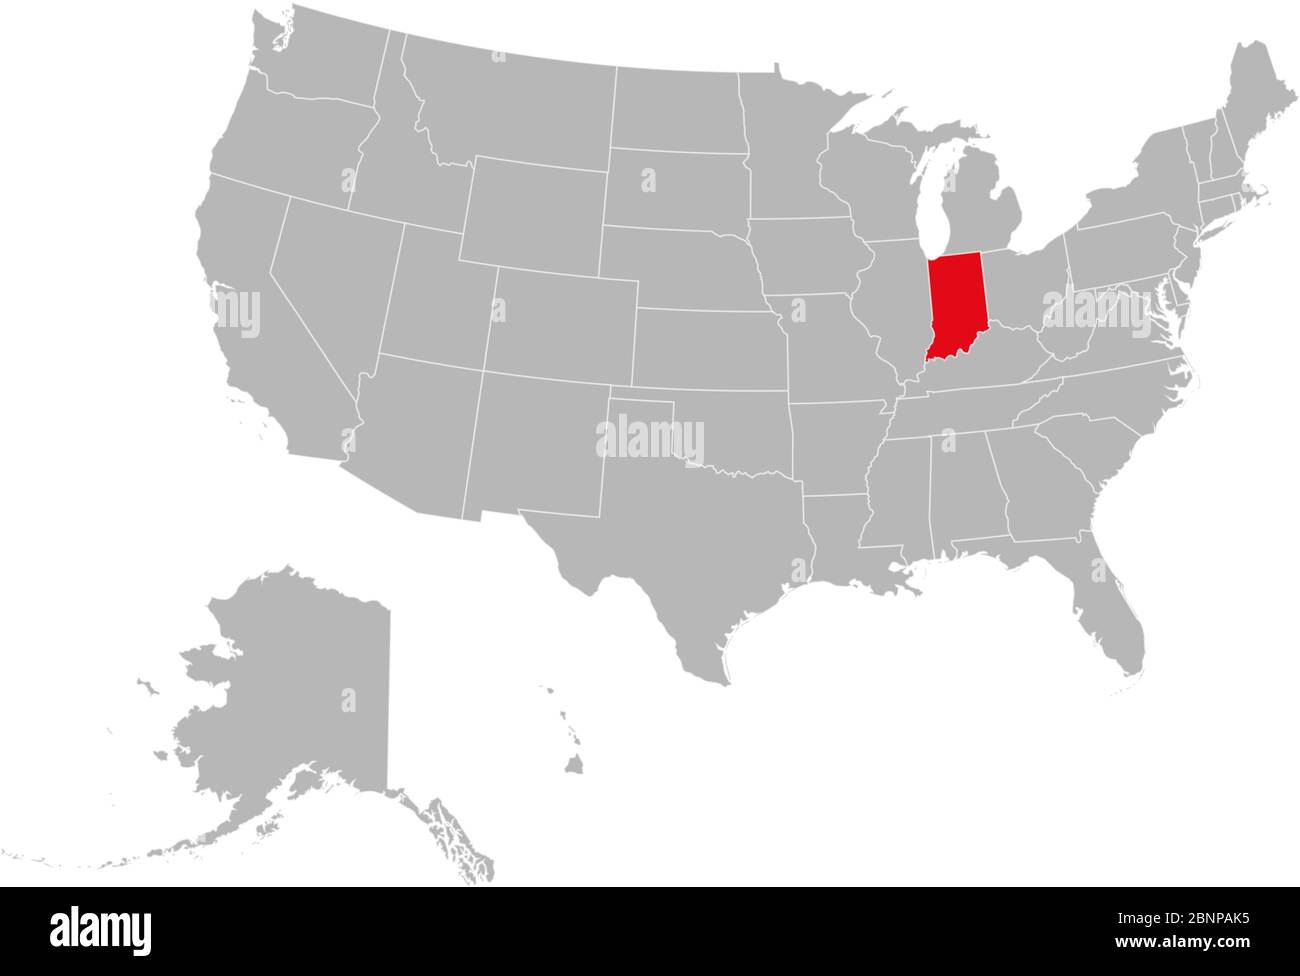 Indiana state highlighted on USA political map vector illustration. Gray background. Stock Vector